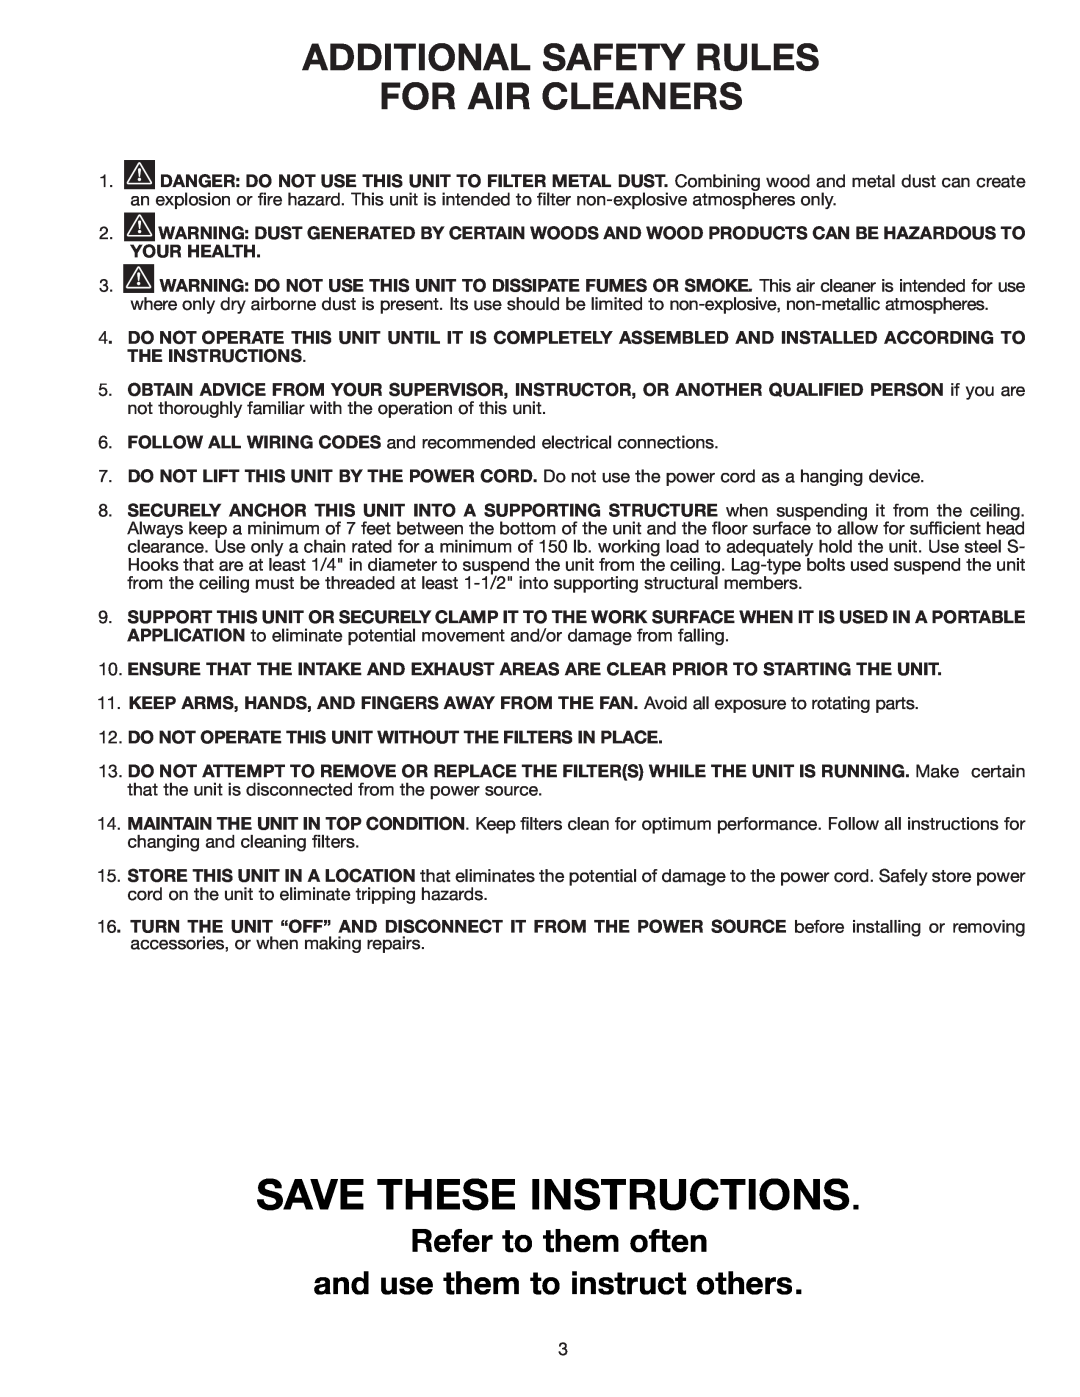 Delta AP200 instruction manual Save These Instructions, Additional Safety Rules For Air Cleaners, Refer to them often 